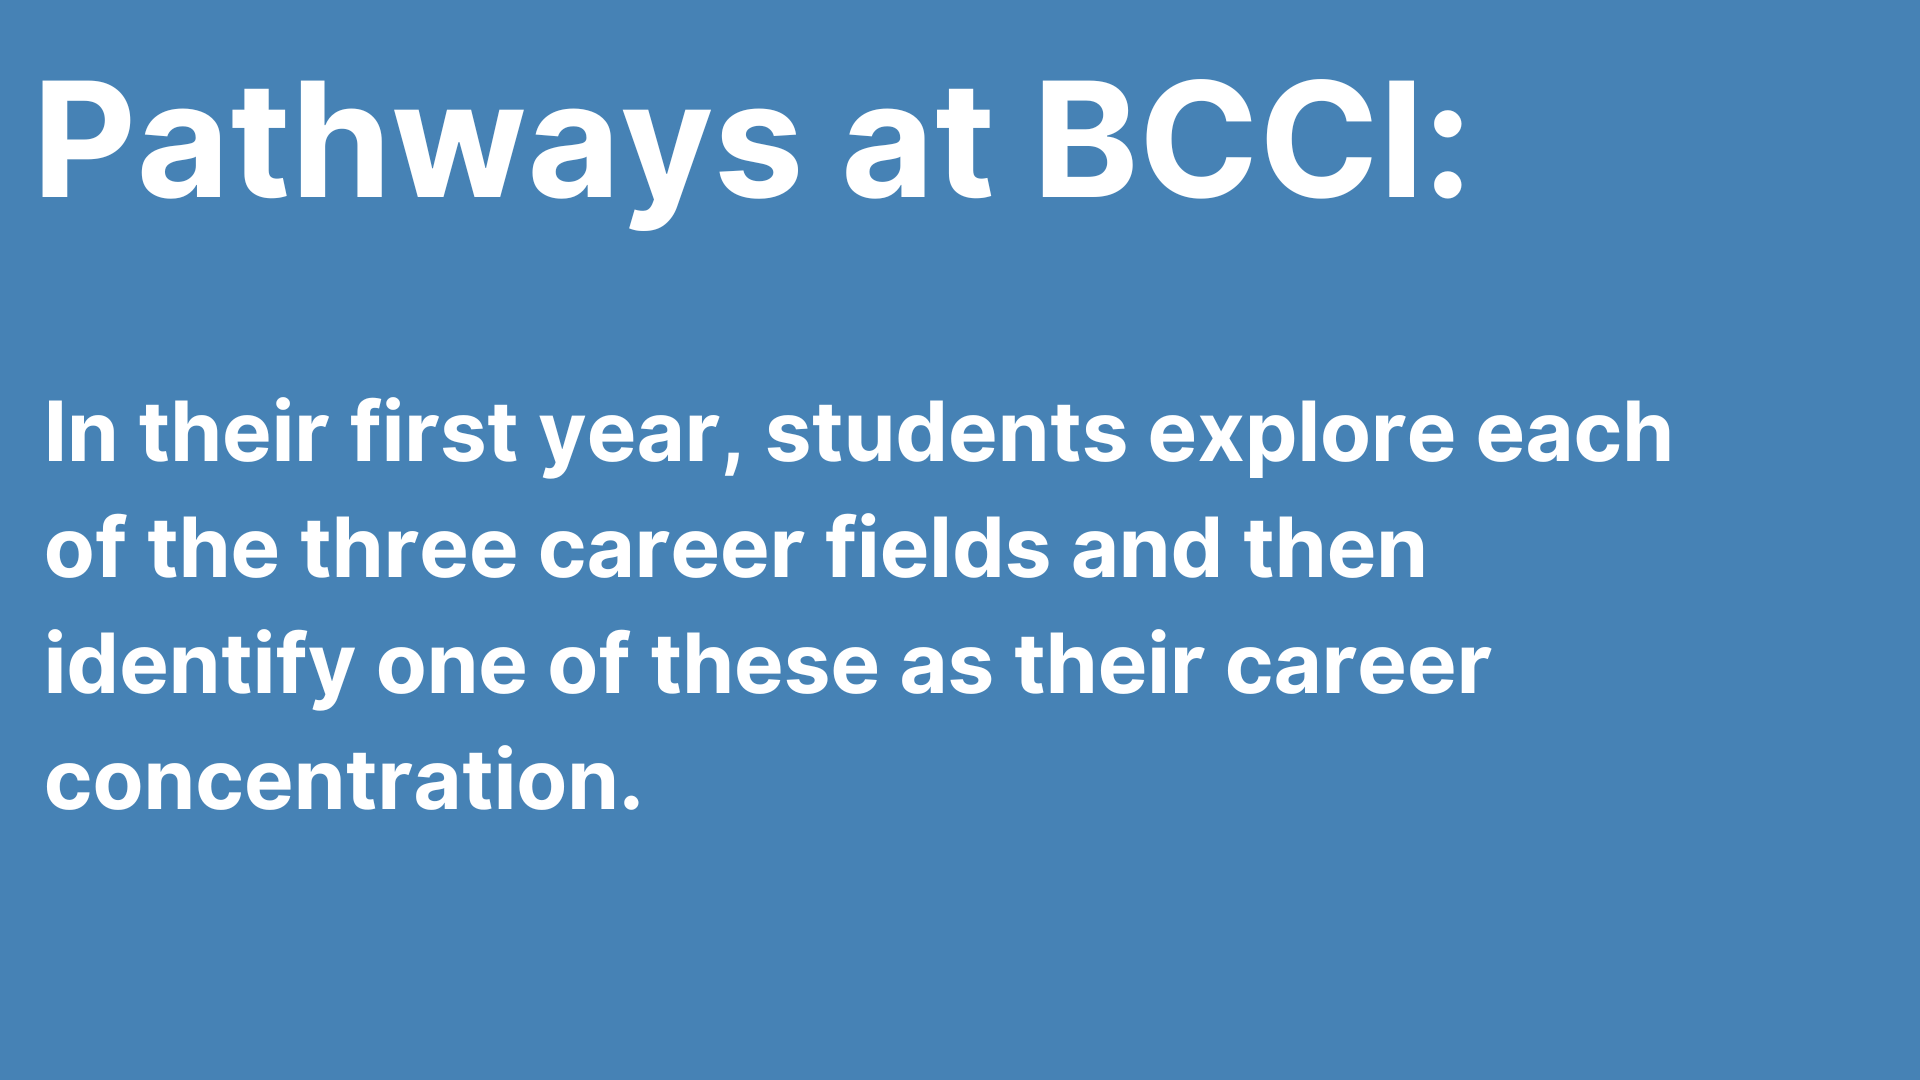 Patways at BCCI in their first year, students explore each of our four career fields and then identify one of these as a career concentration.